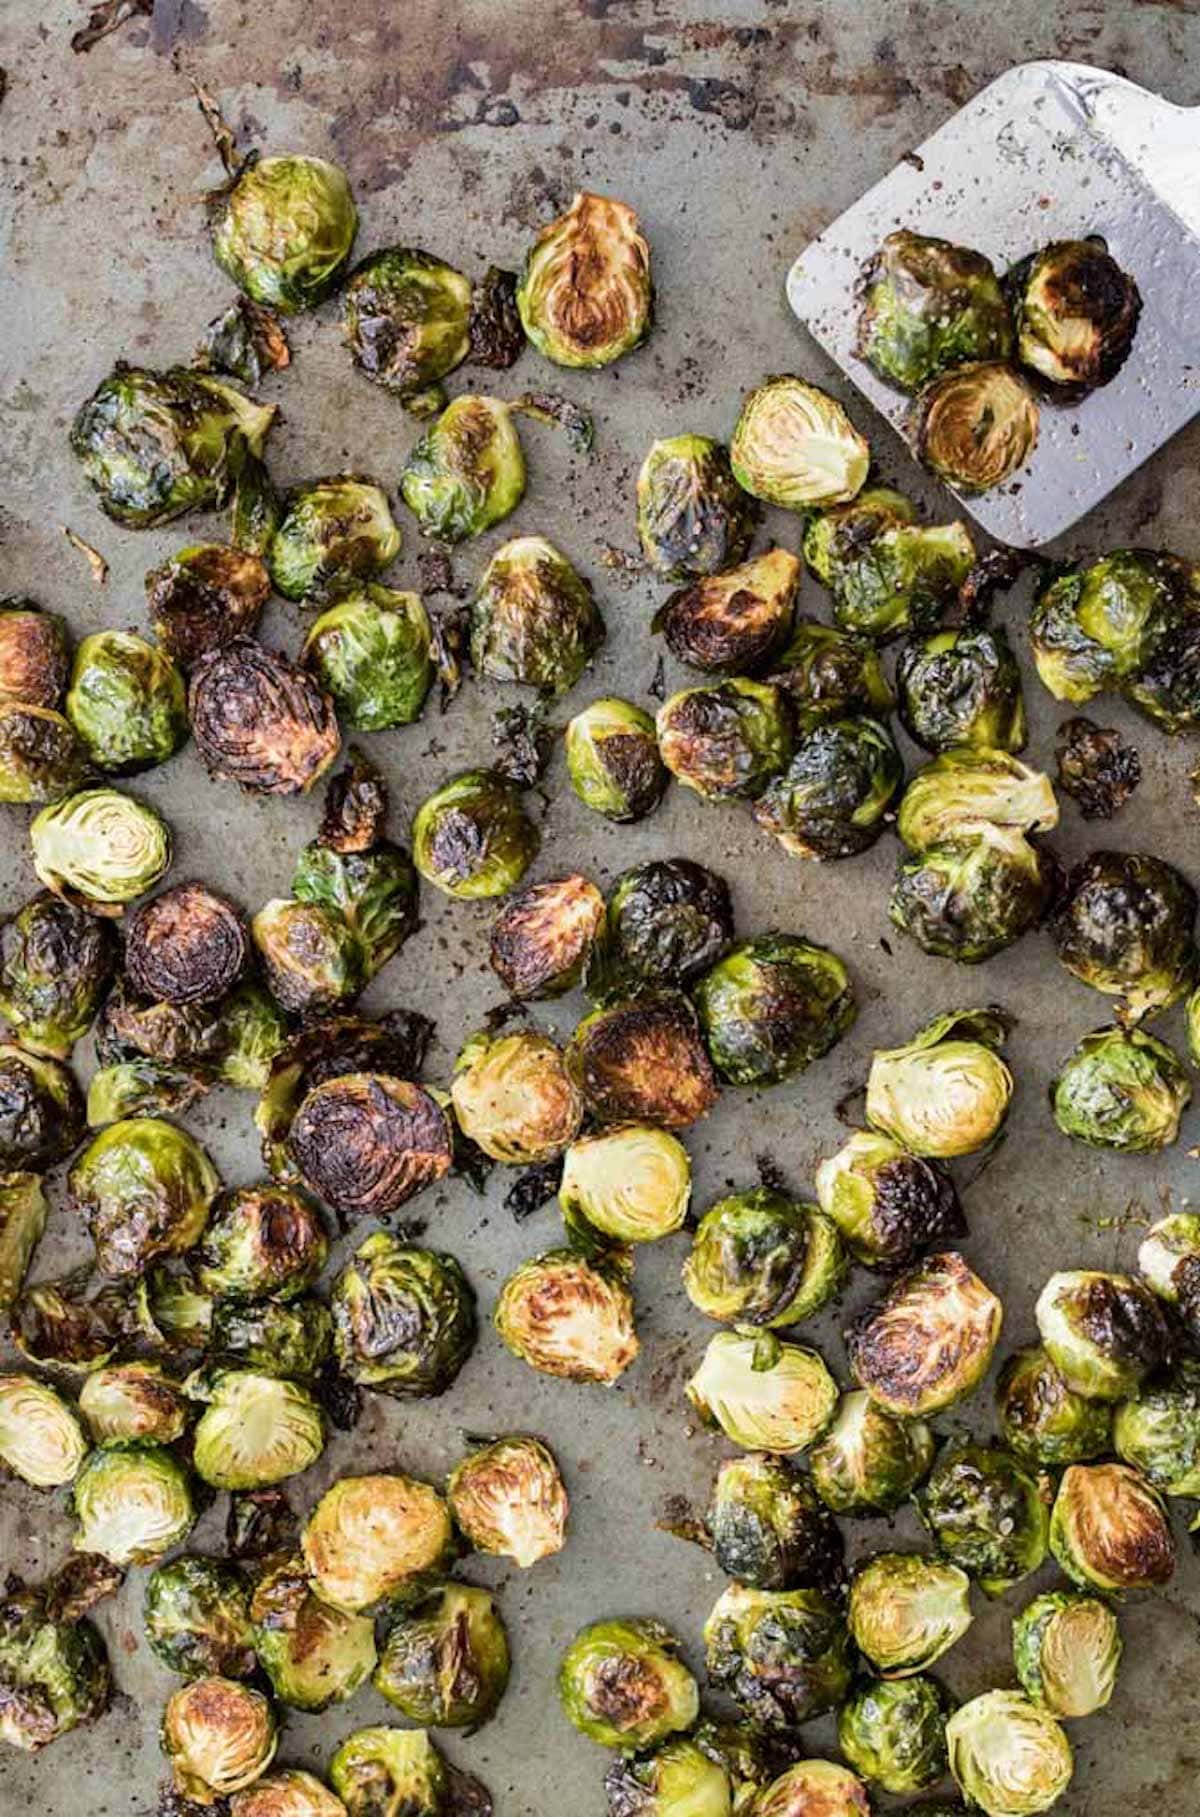 Overhead view of a tray of brussels sprouts after roasting.